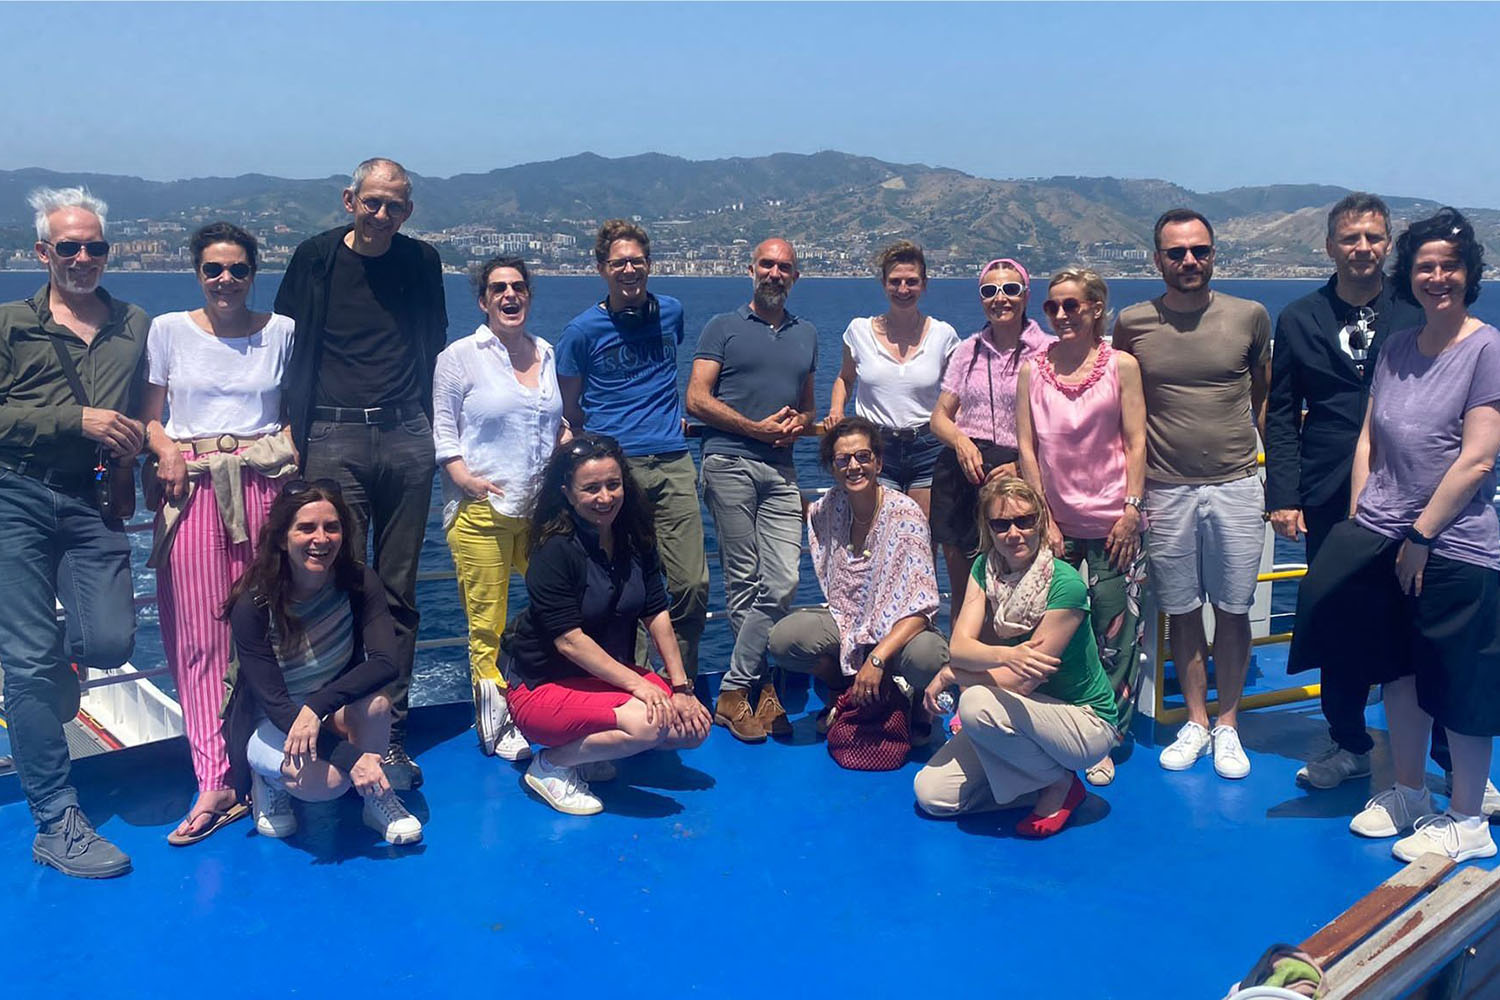 Alumni of the program join our network and benefit from journeys to changemakers. Participants of the Ashoka Visionary Journey to Calabria & Sicily, June '22, pose for a group photo on the blue deck of a ship, sea and island in the background.